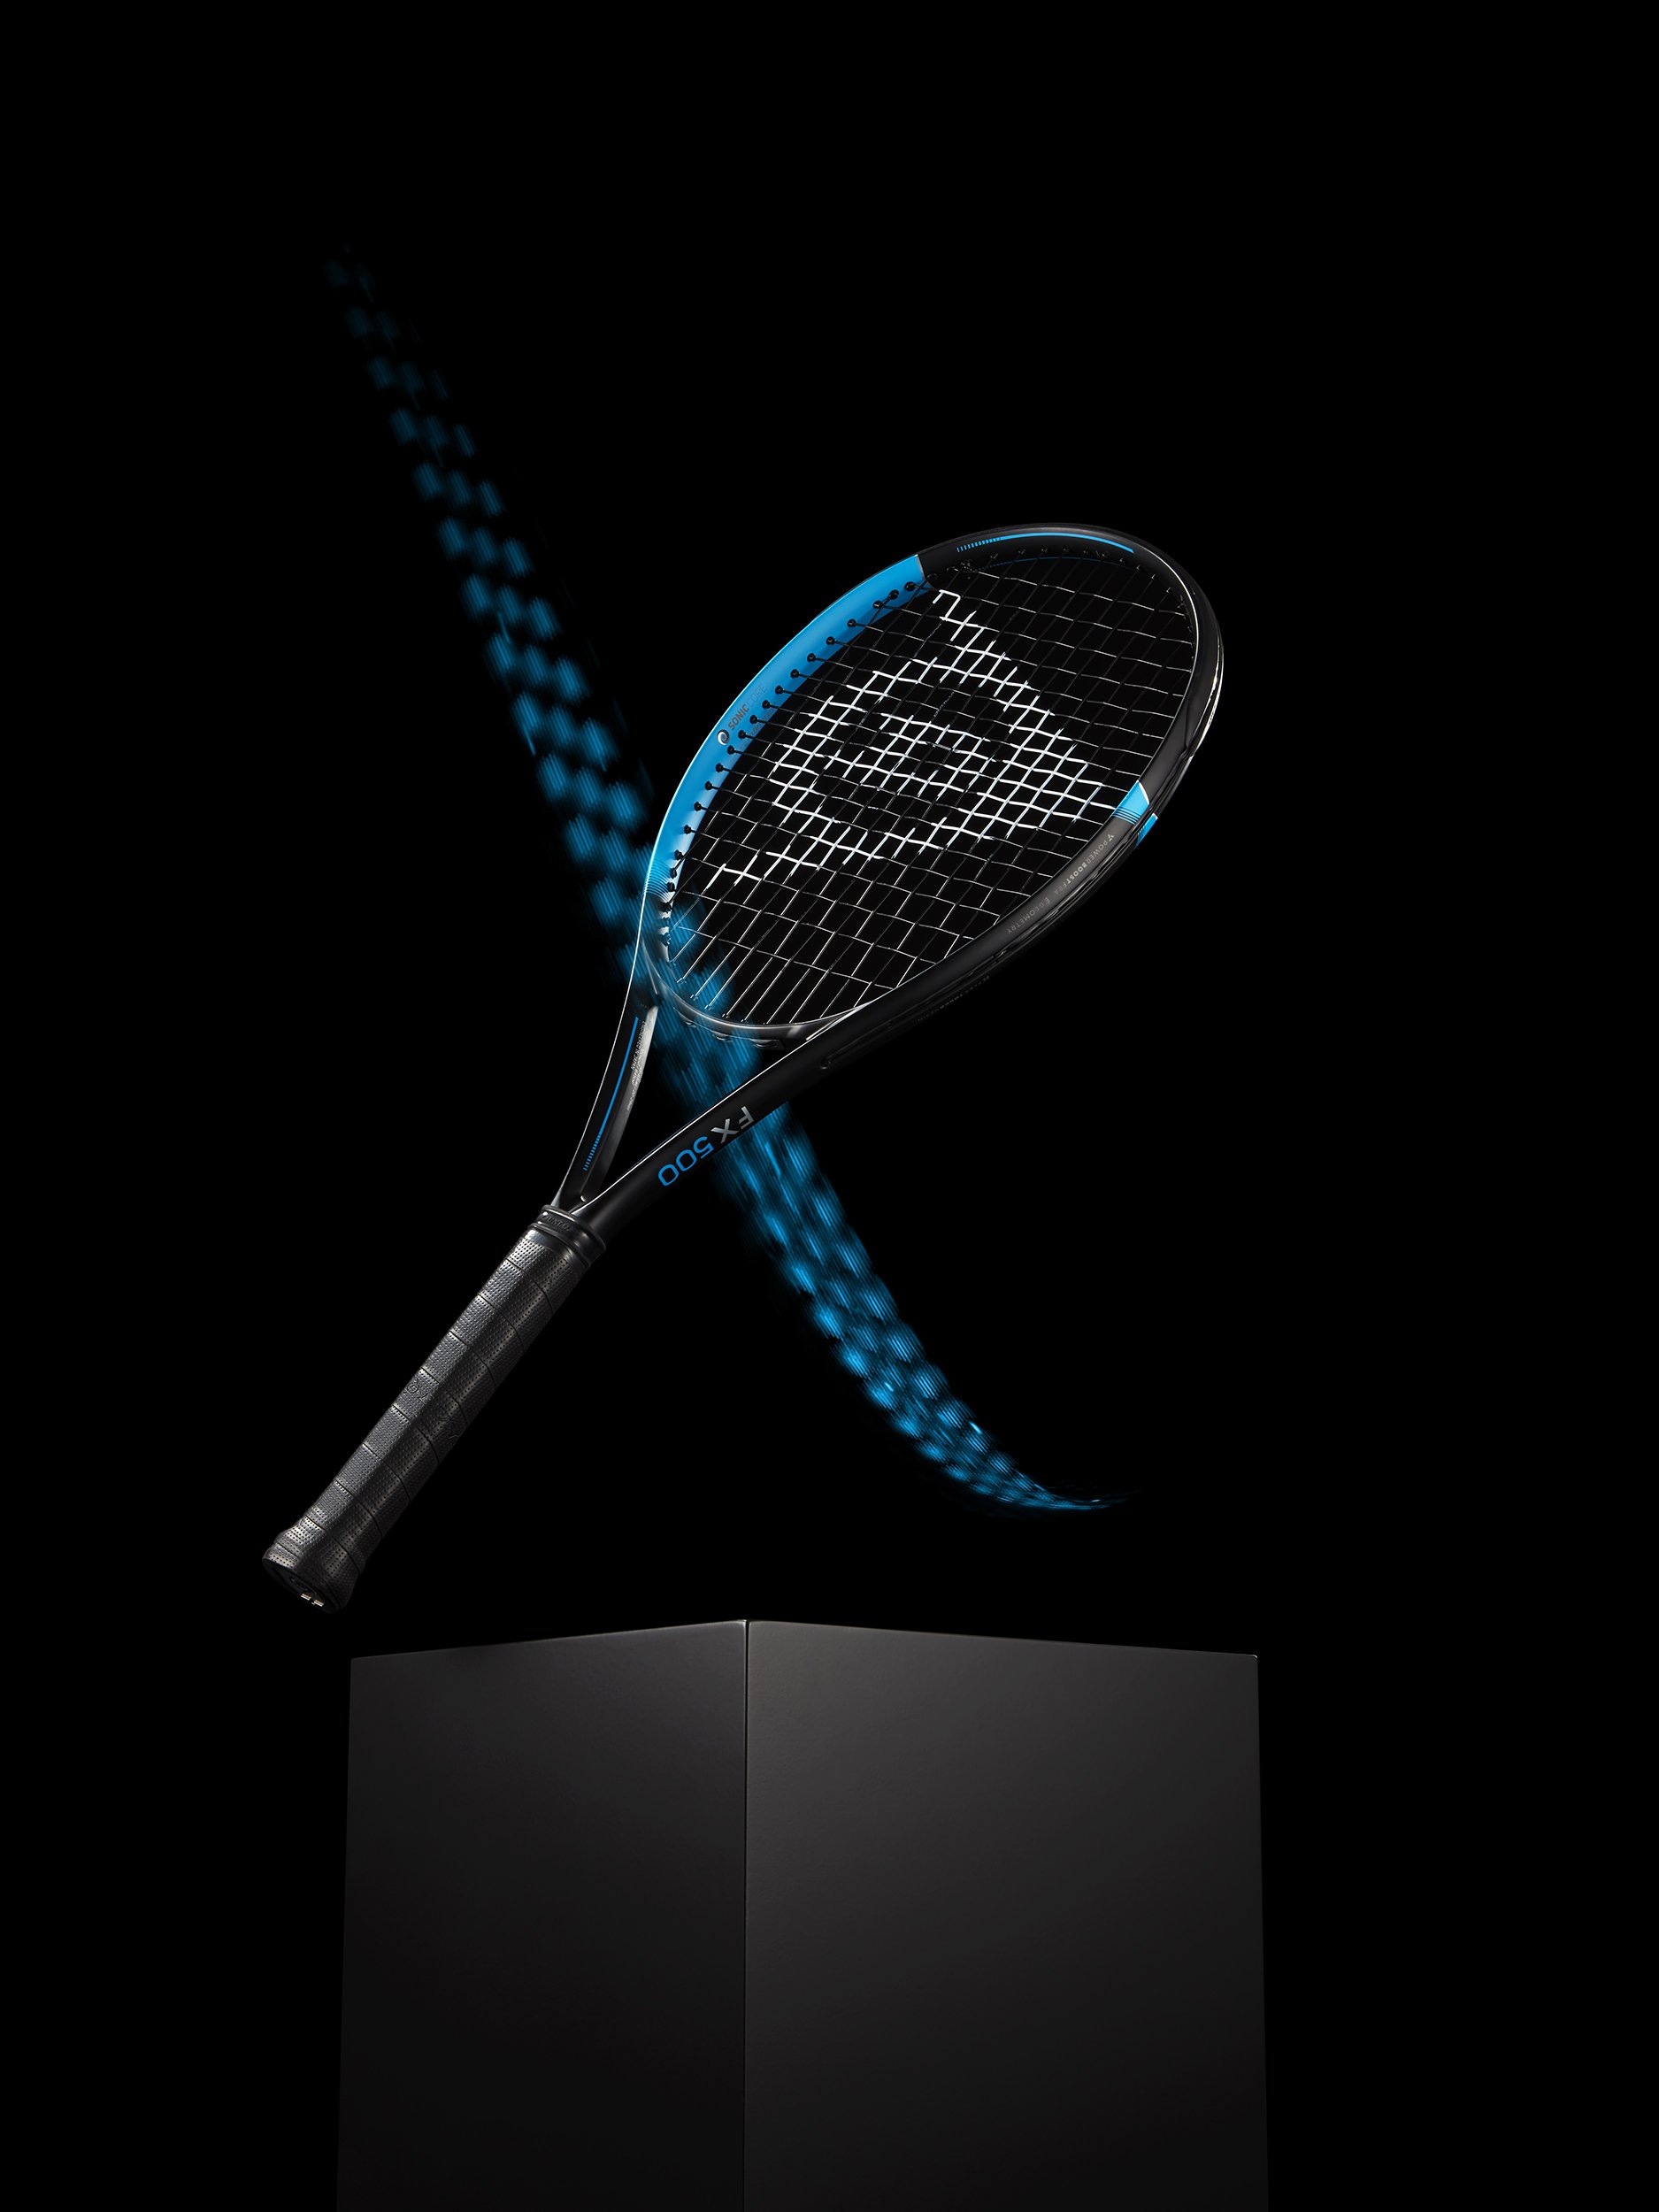 Dunlop Tennis Racket - Advertising Photography by Simon Lyle Photography